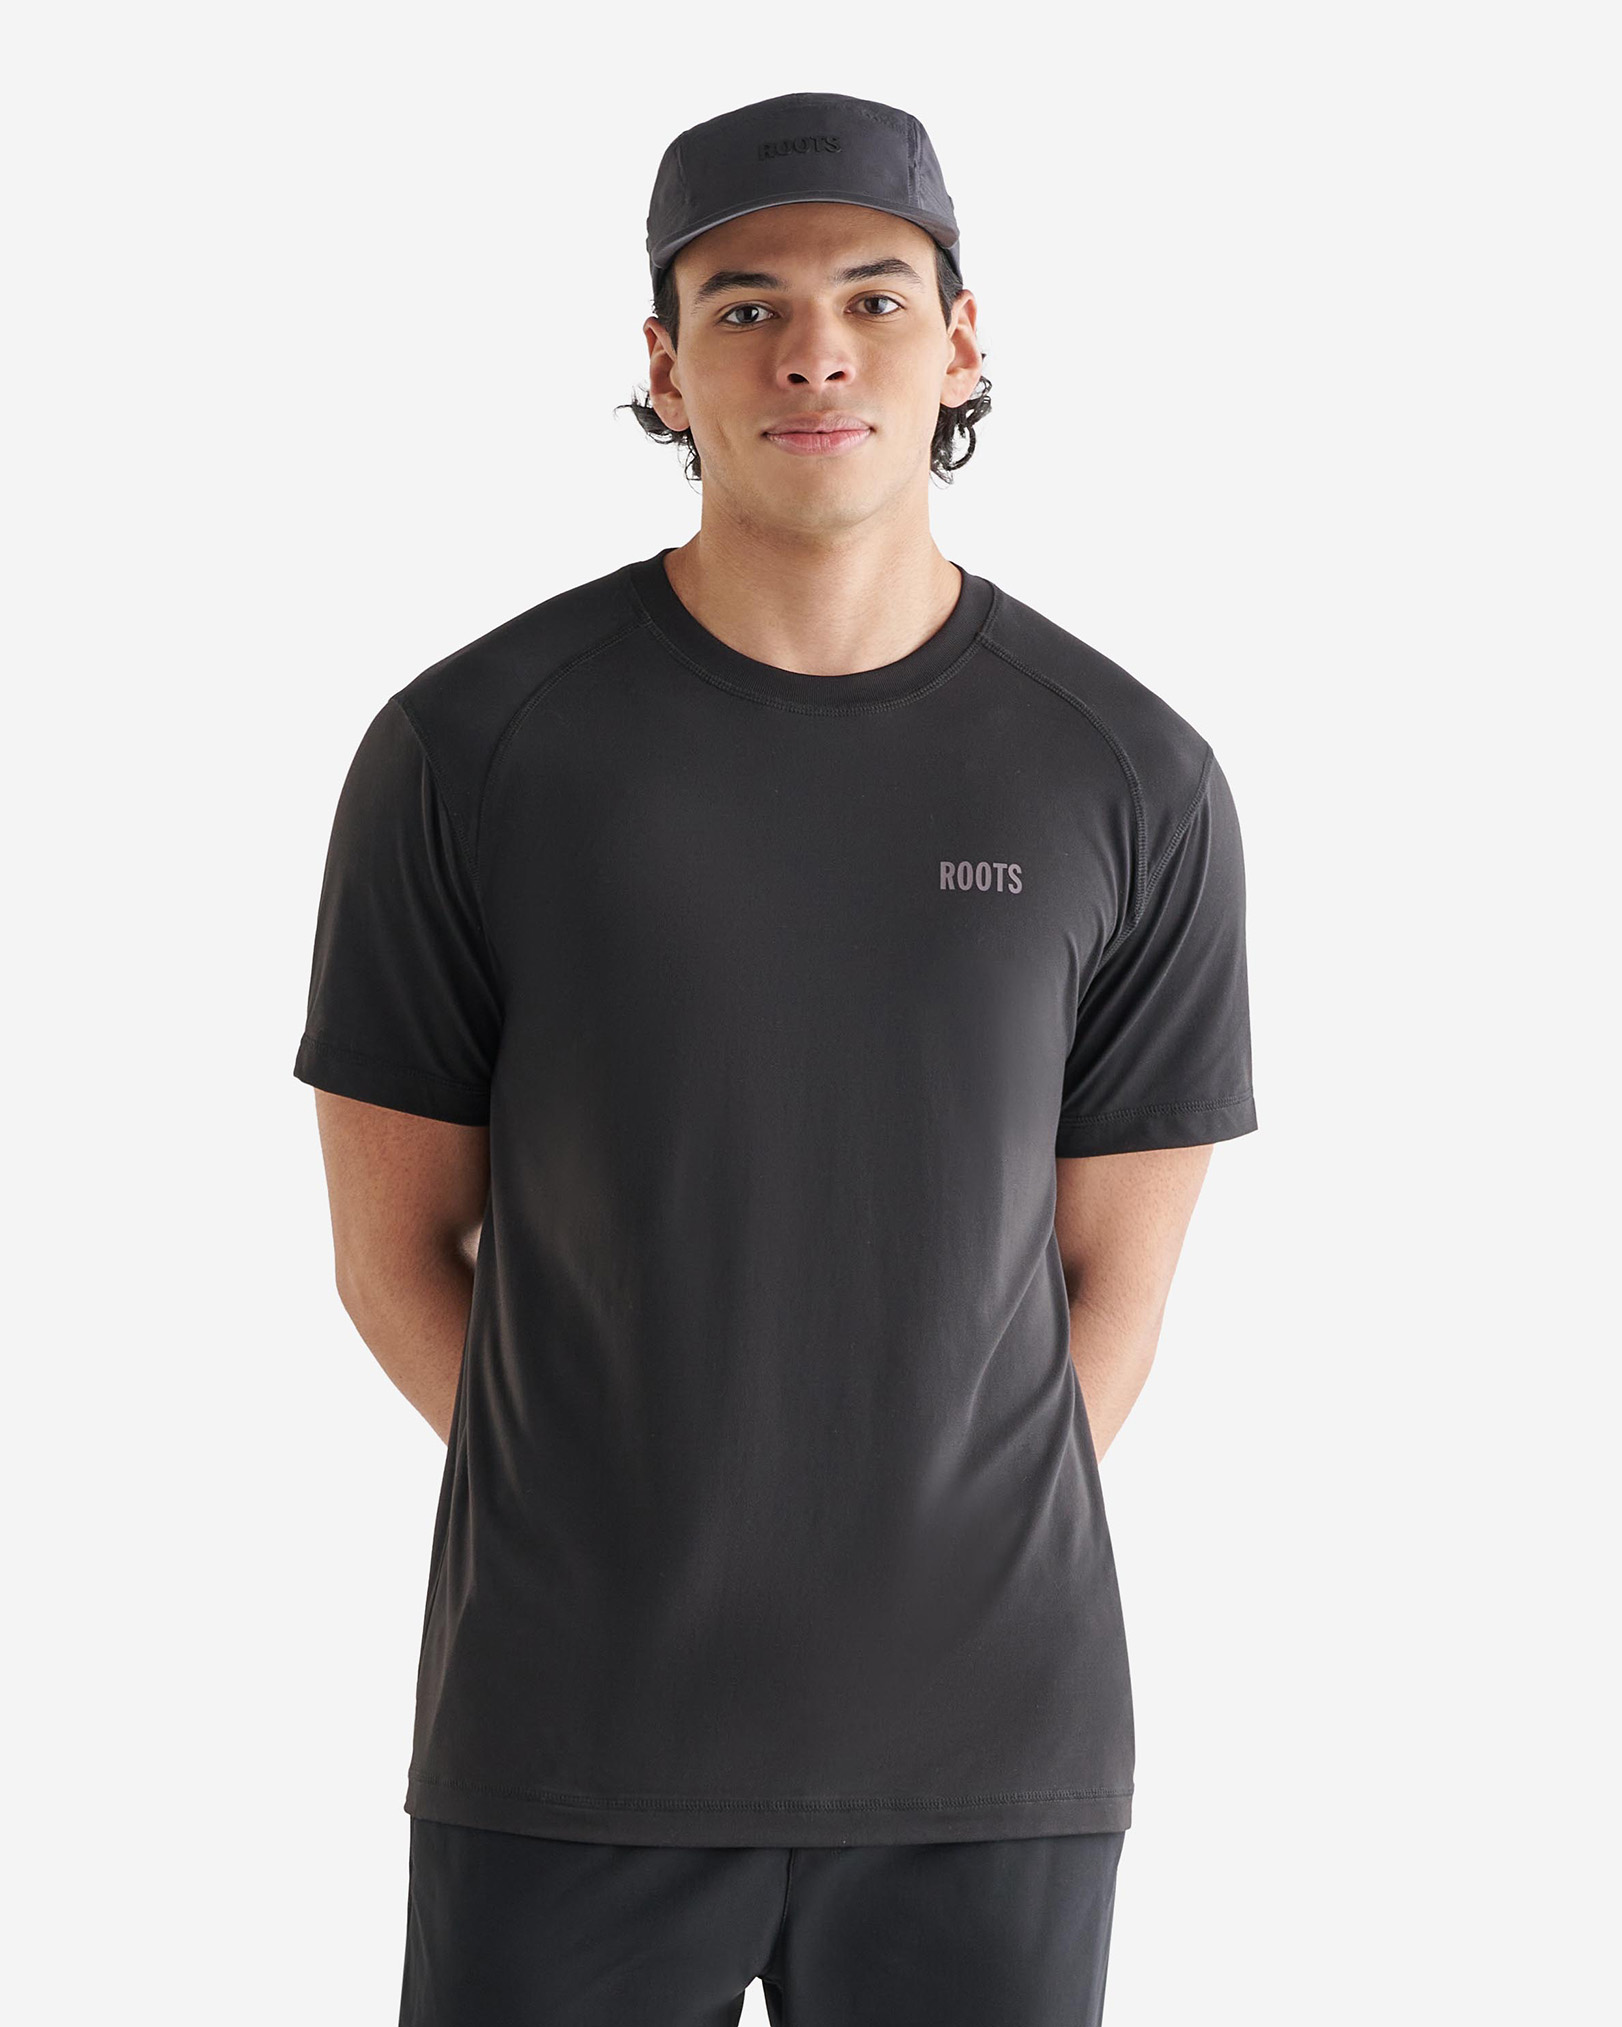 Roots Renew Graphic Short Sleeve T-Shirt in Black